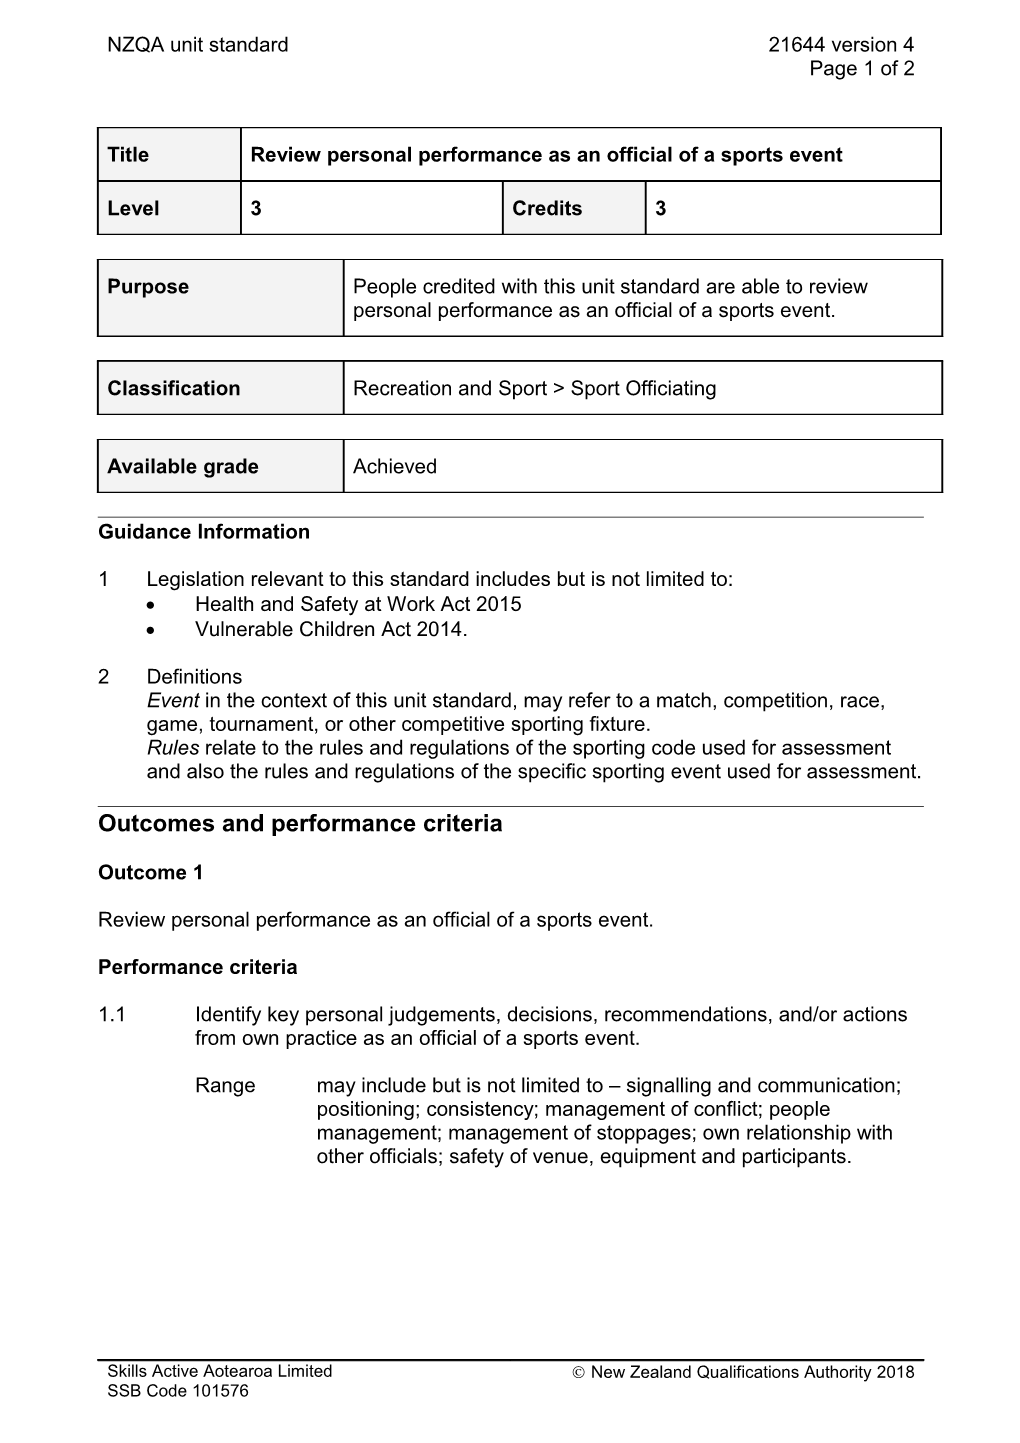 21644 Review Personal Performance As an Official of a Sports Event